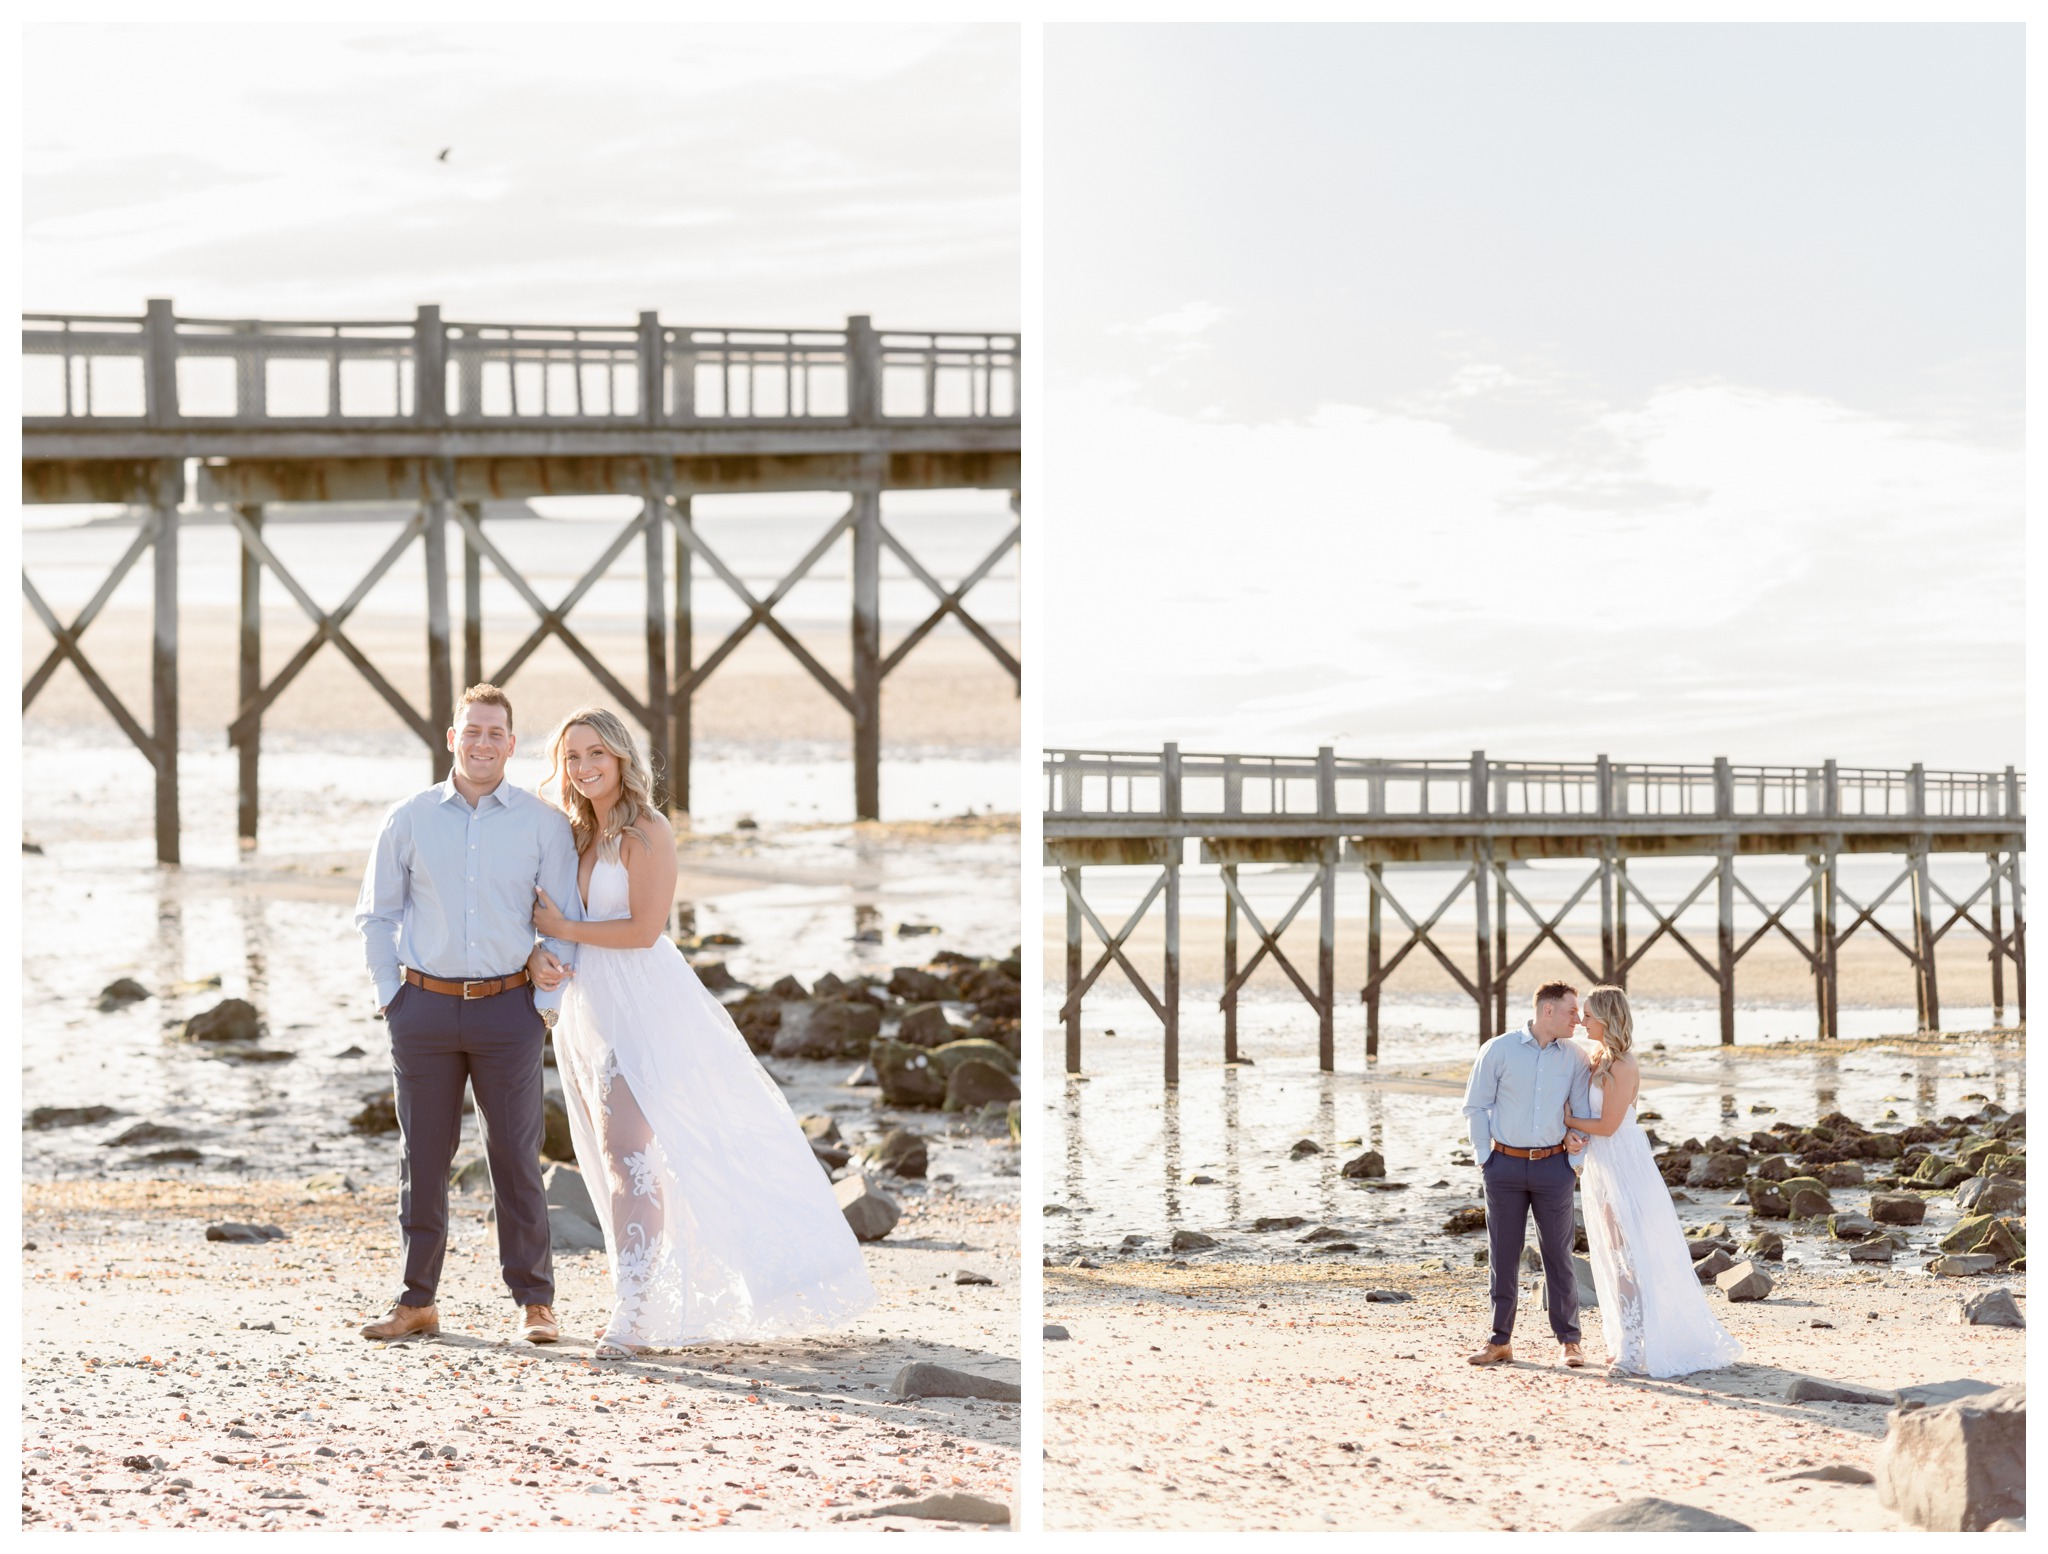 walnut beach engagement session in milford ct at silver sands beach with pier in background